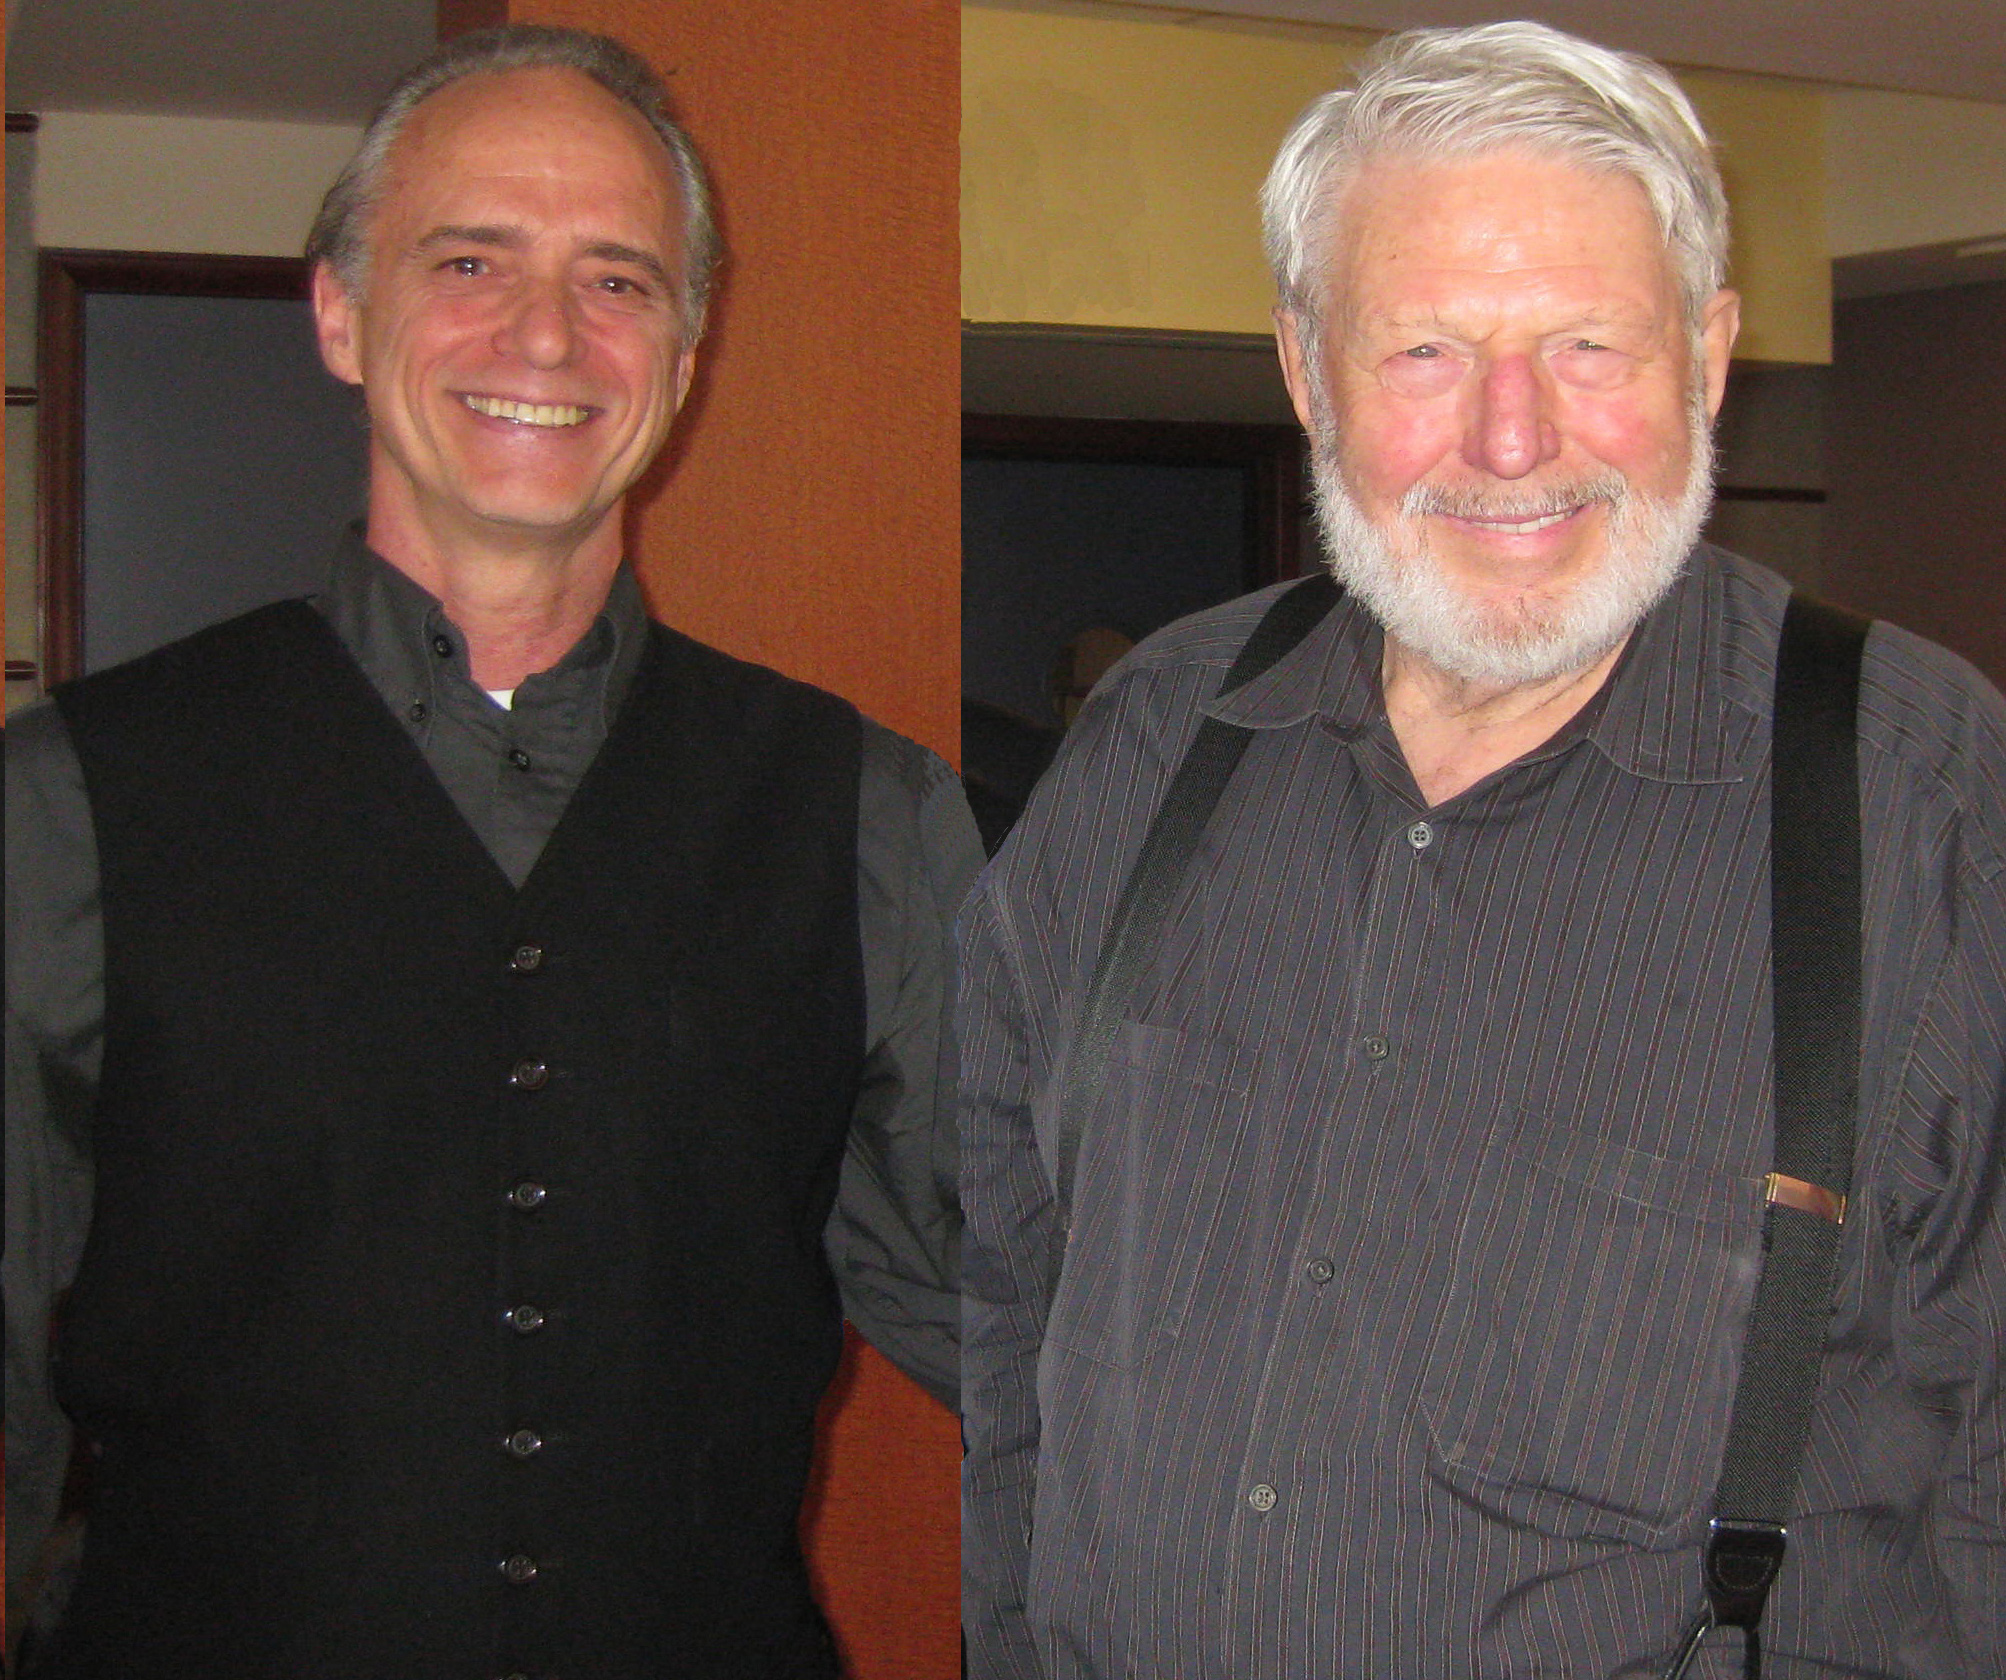 2012 Carson Grant (Vice President) and Theodore Bikel (President) of the 4As, The Associated Actors and Artistes of America convention.